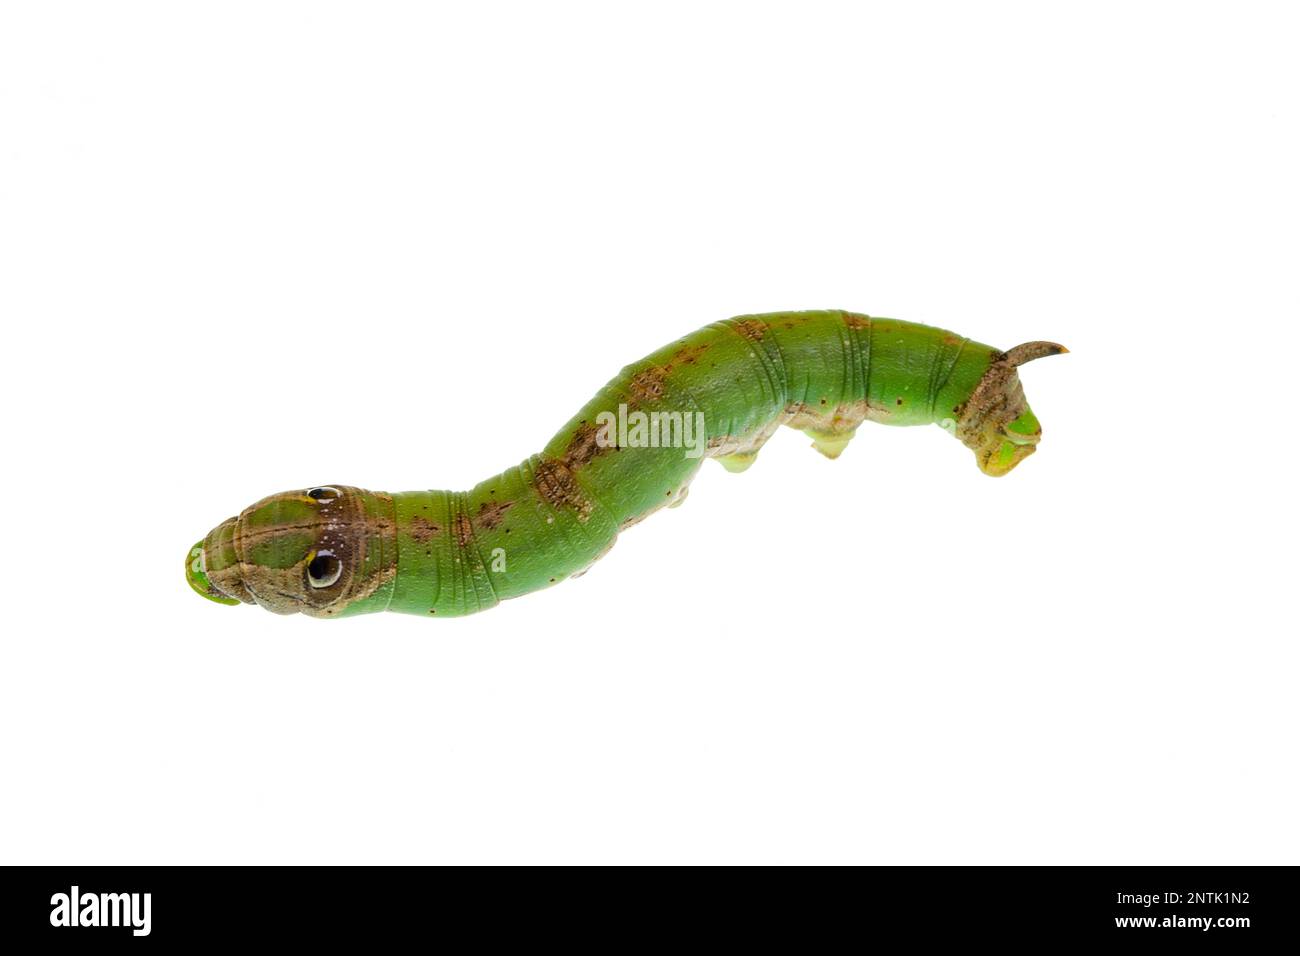 Caterpillar hawkmoth larva, Eupanacra splendens, are green with large eyespots and a strong backward curving horn at the tail. Stock Photo